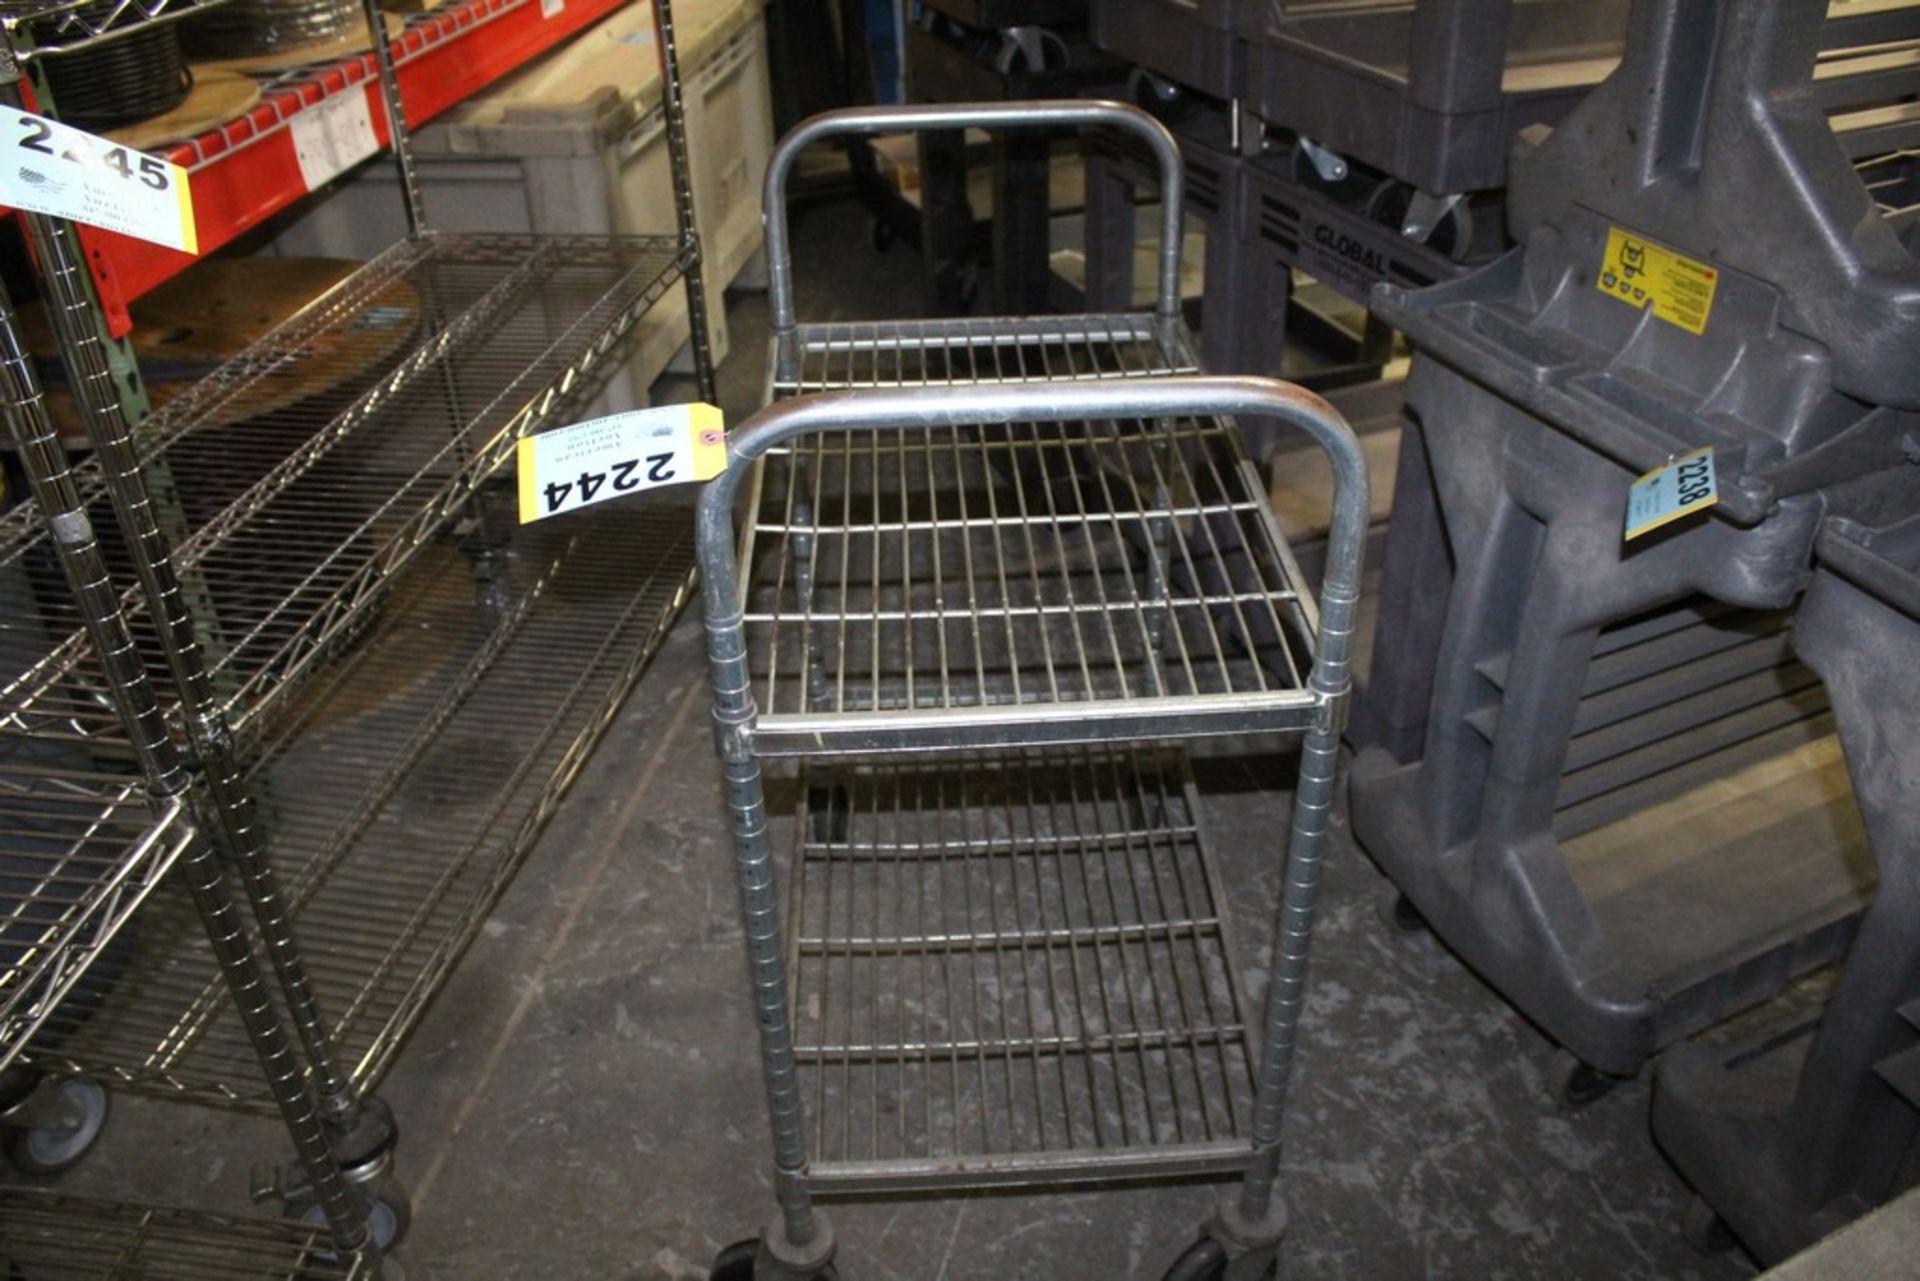 PORTABLE WIRE CART, 30" X 30" X 18: